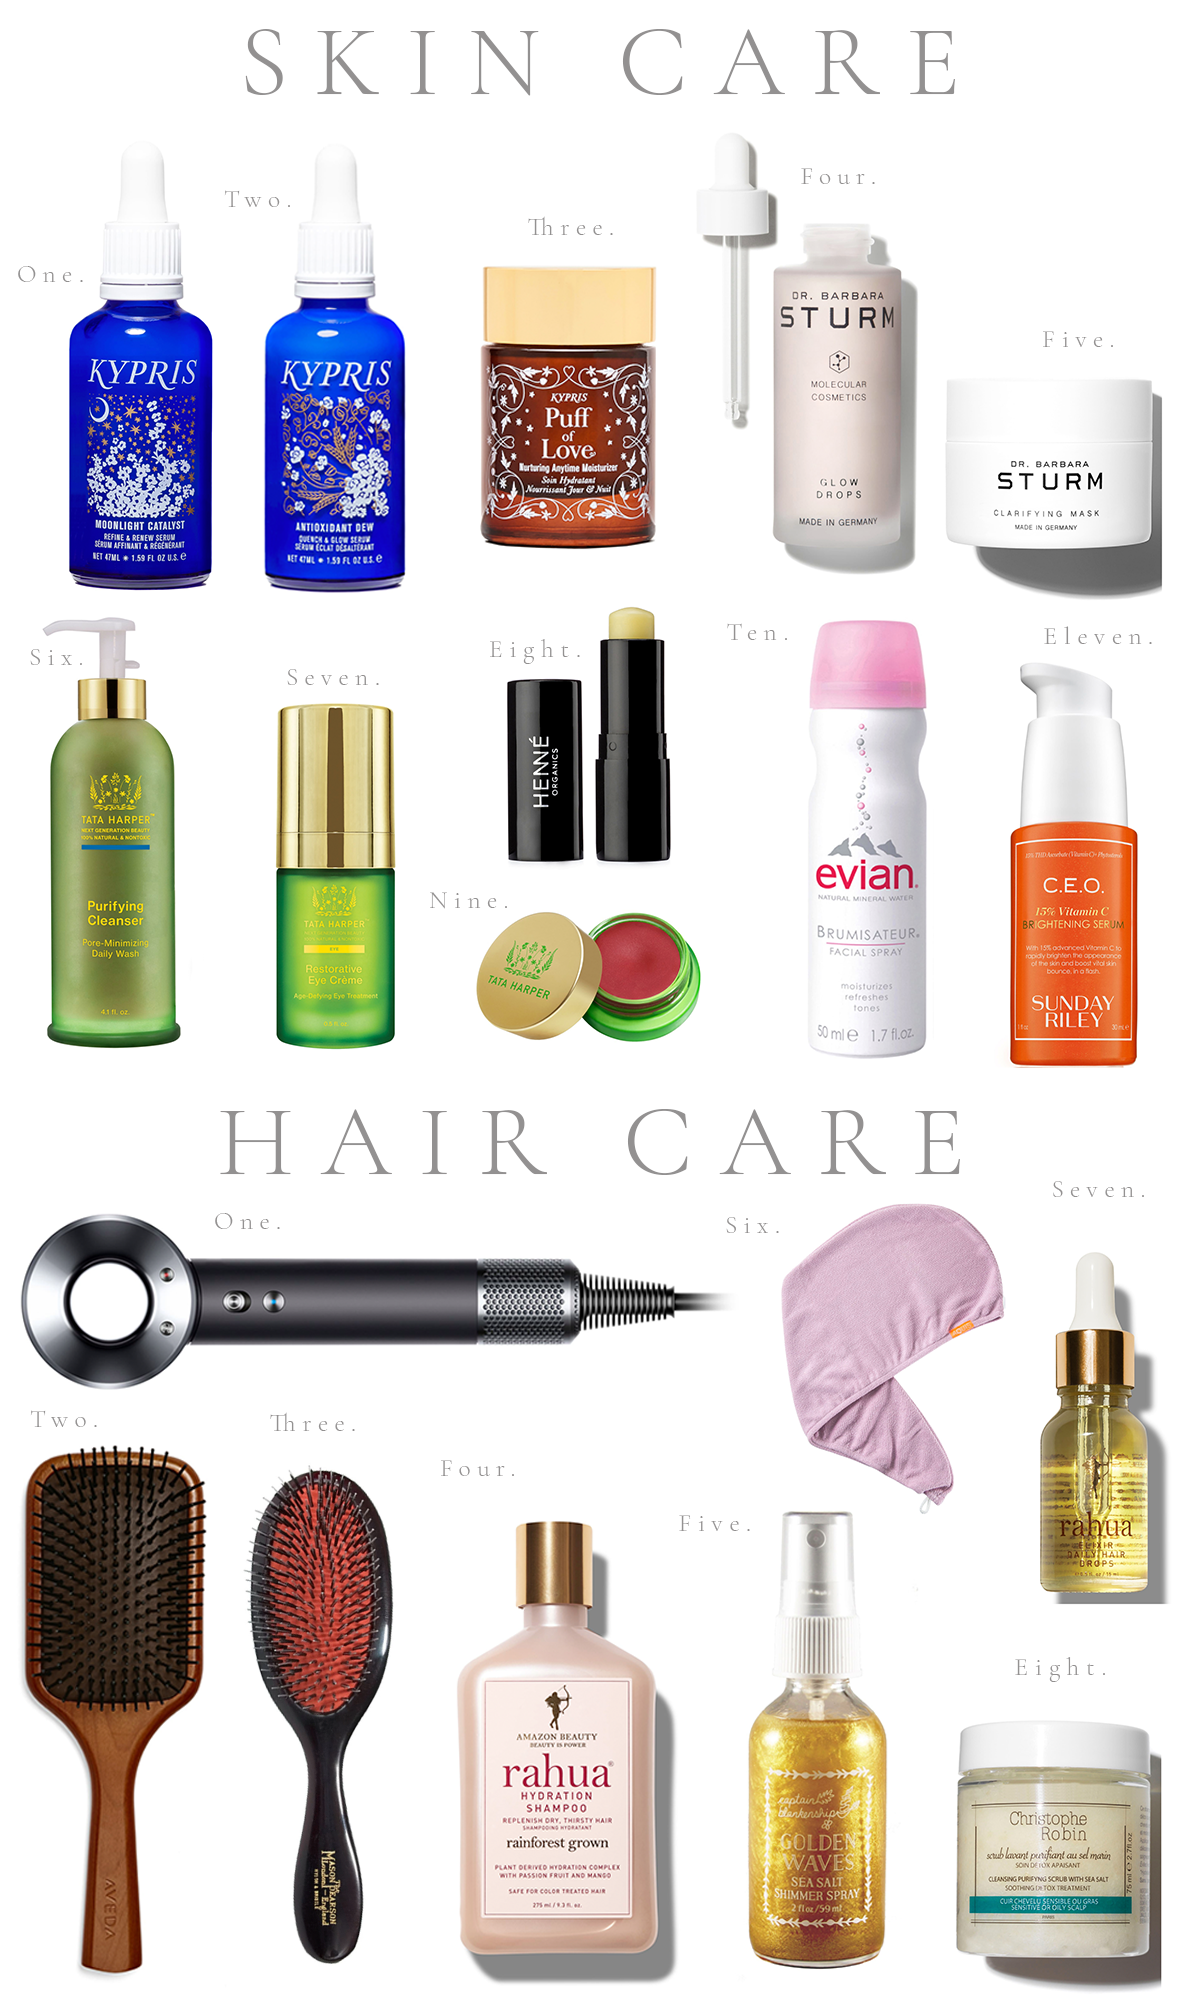 Products on sale at Nordstrom, best of skincare and haircare.